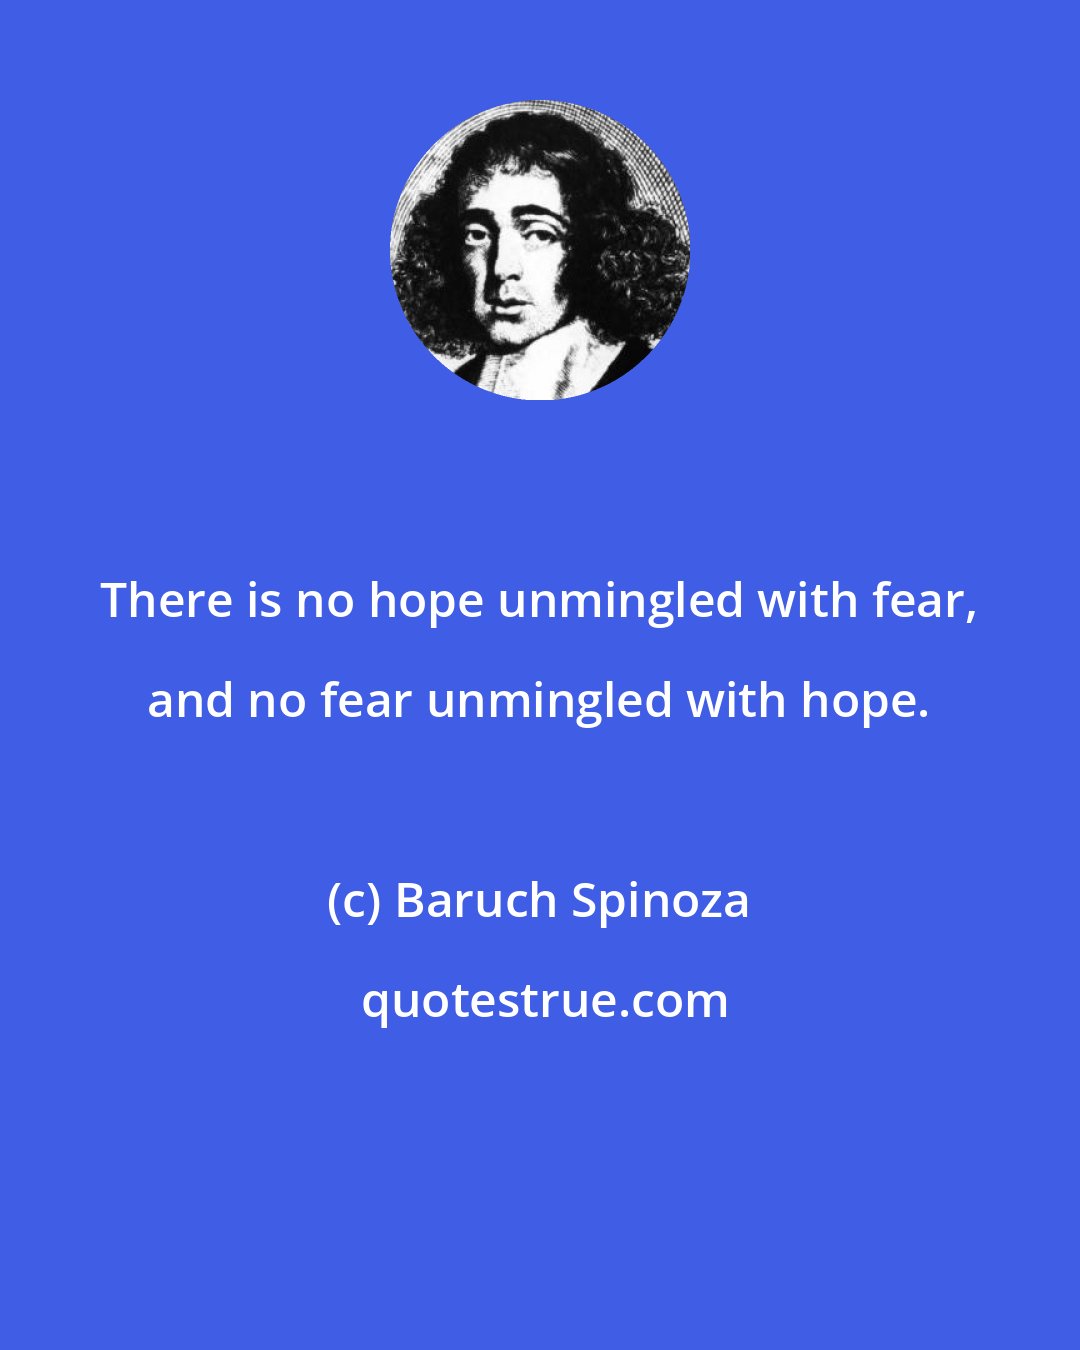 Baruch Spinoza: There is no hope unmingled with fear, and no fear unmingled with hope.